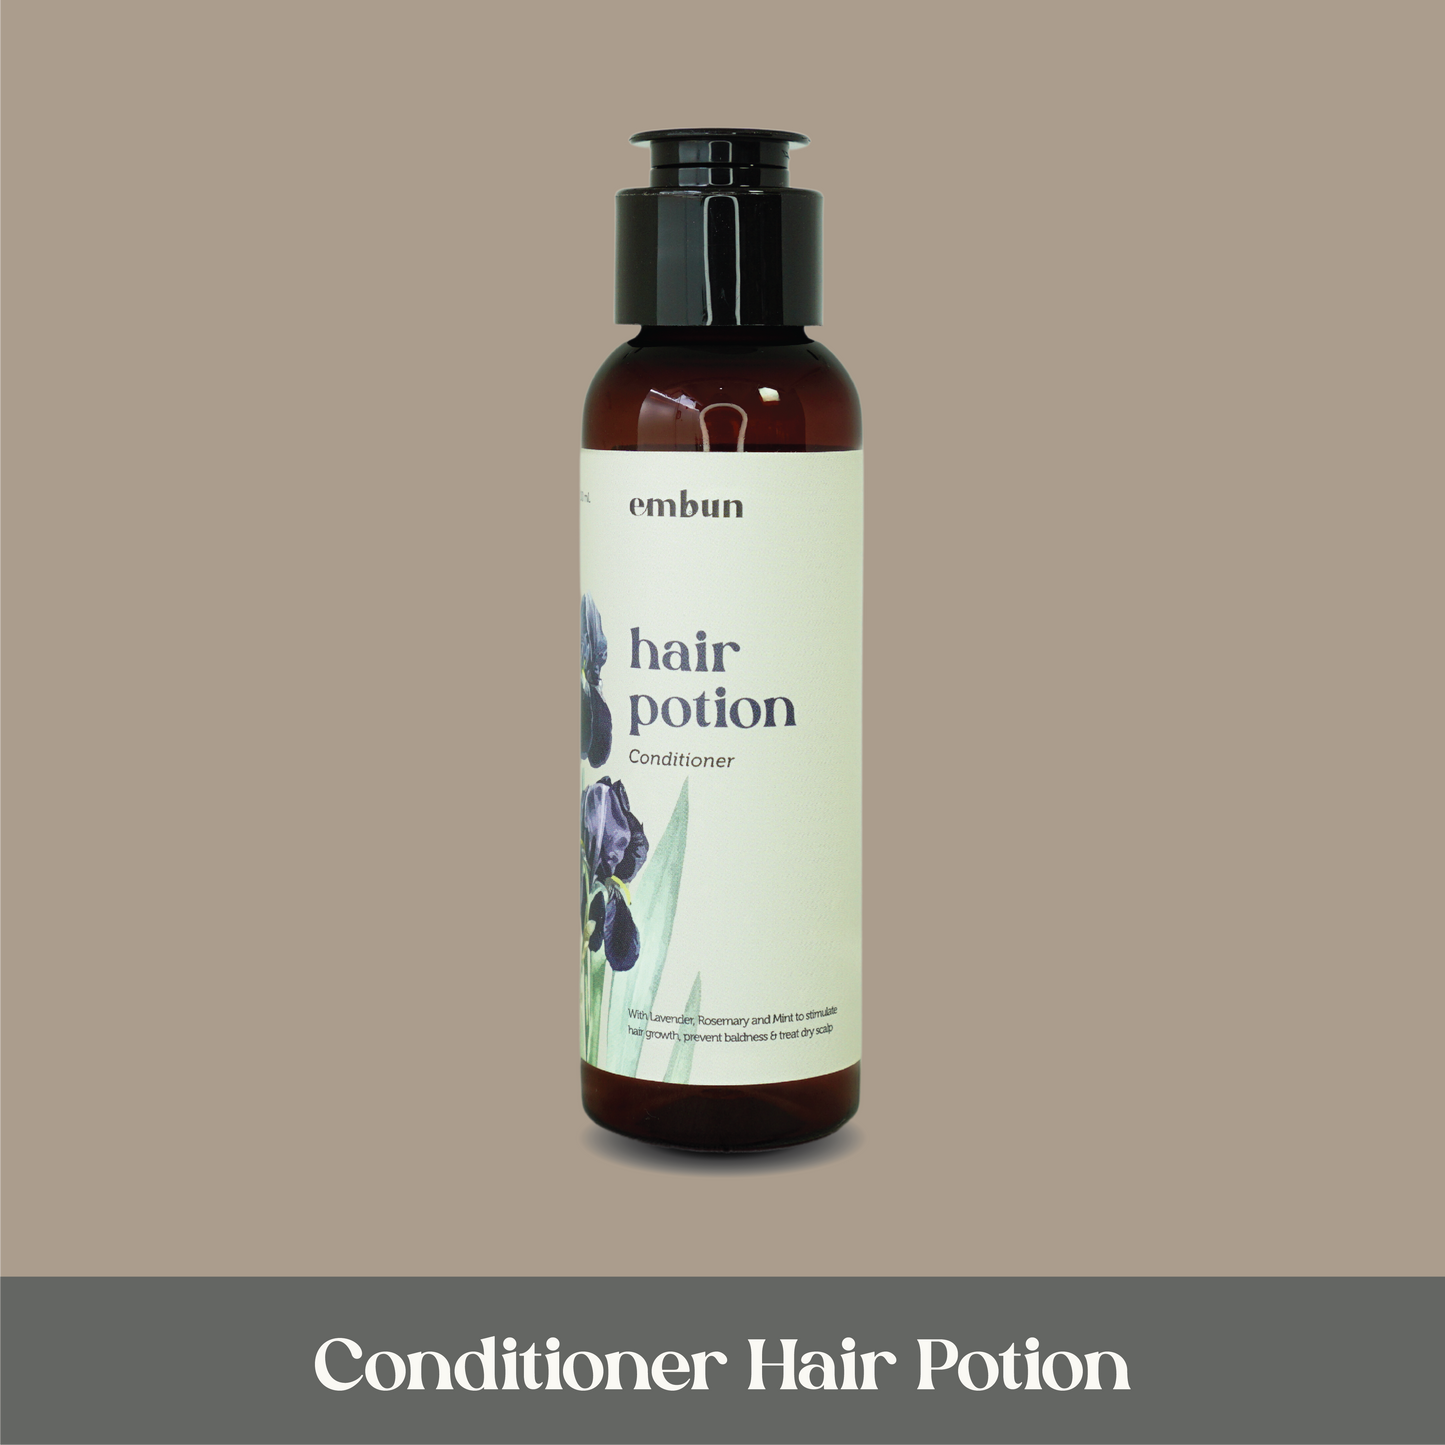 Conditioner Hair Potion